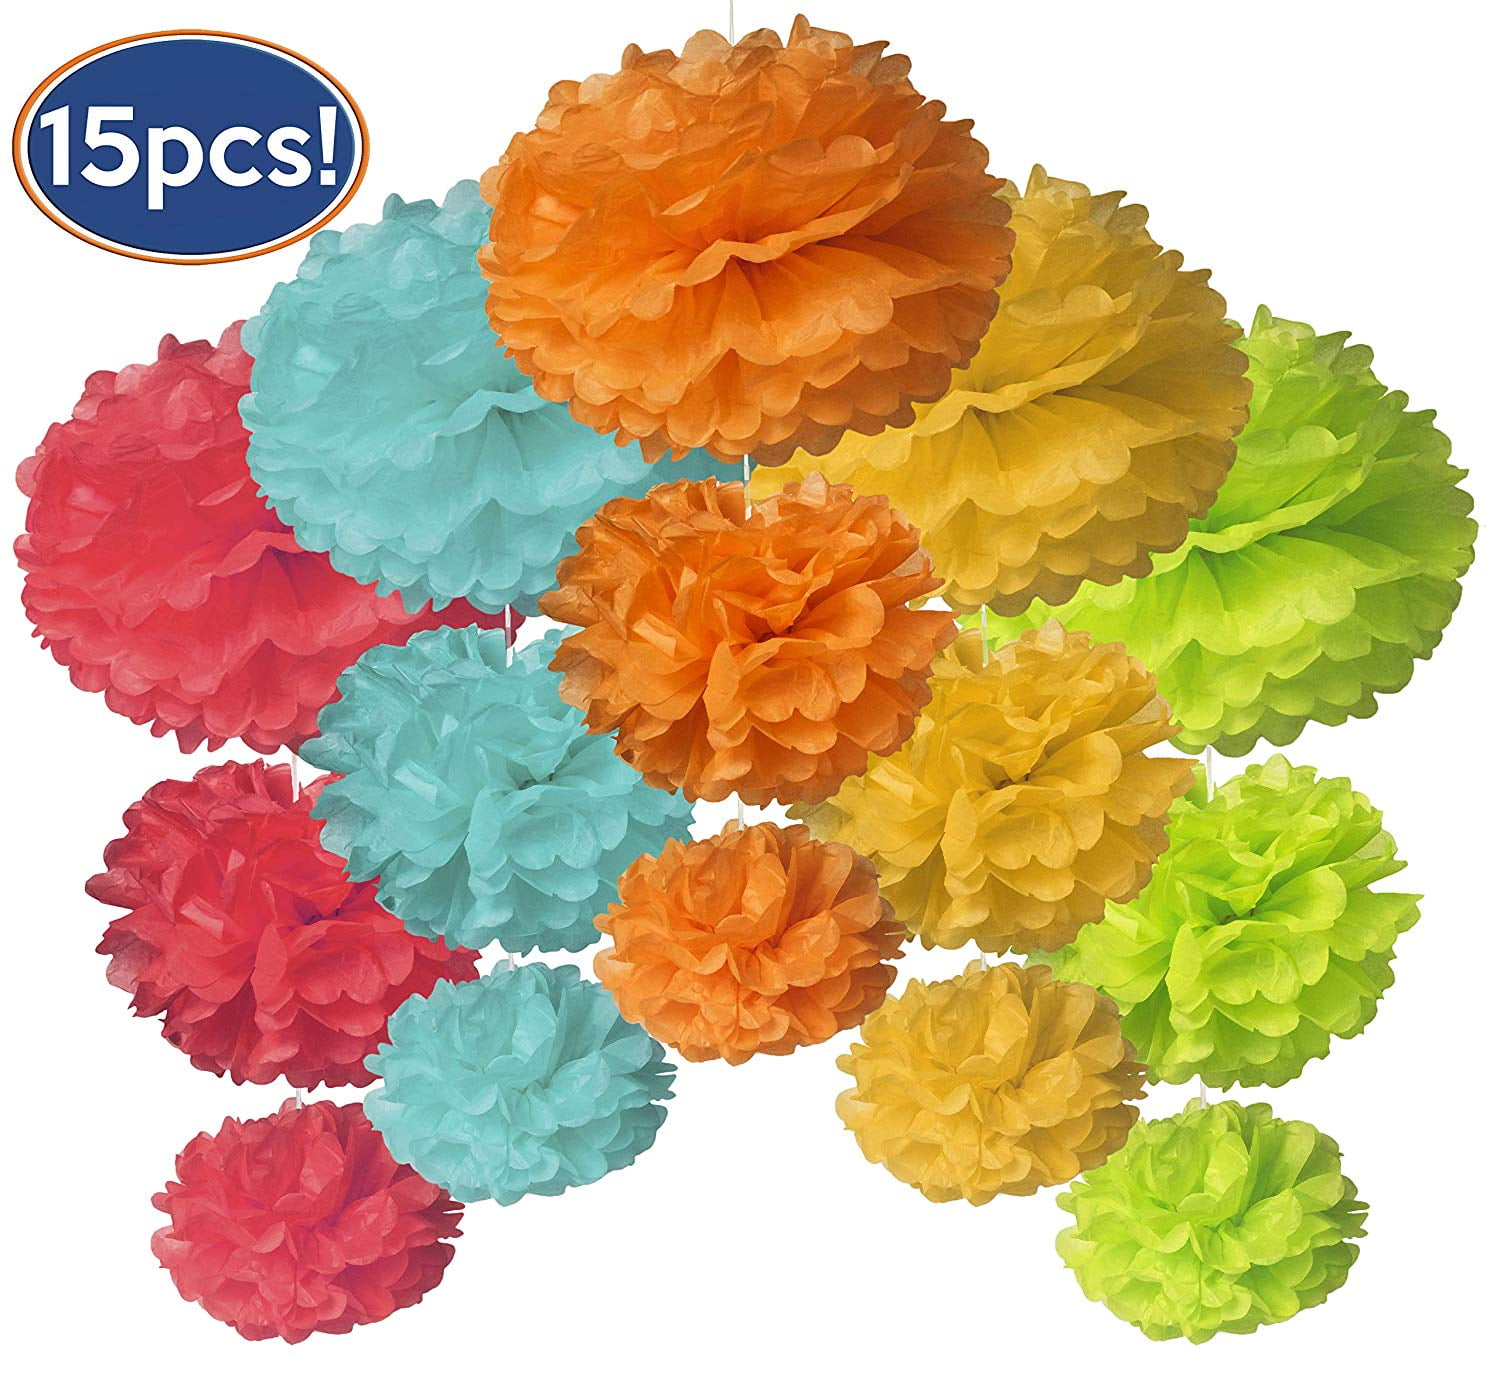 6" 8" 10" 12" 15" pompoms paper ball fabric flowers decoration weddings party